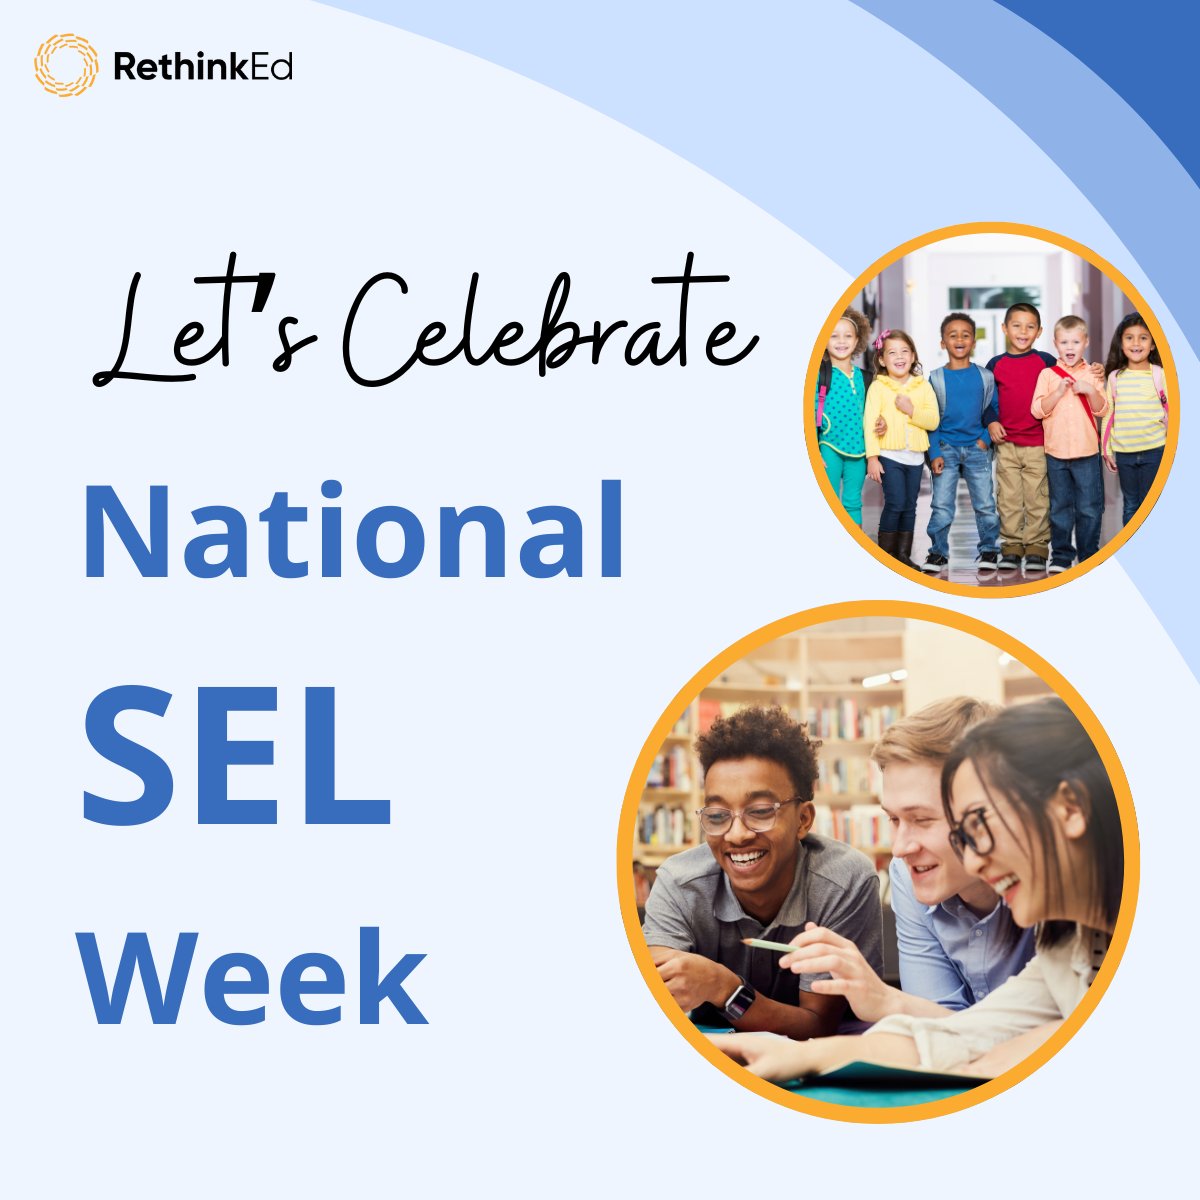 It's National SEL Week! #SEL teaches critical skills like self-awareness, responsible decision-making, relationship building, and more. Let's work together to equip ALL students with the skills they need. bit.ly/3v0lOnA #SELWeek #SELDay #MentalWellness #K12Education